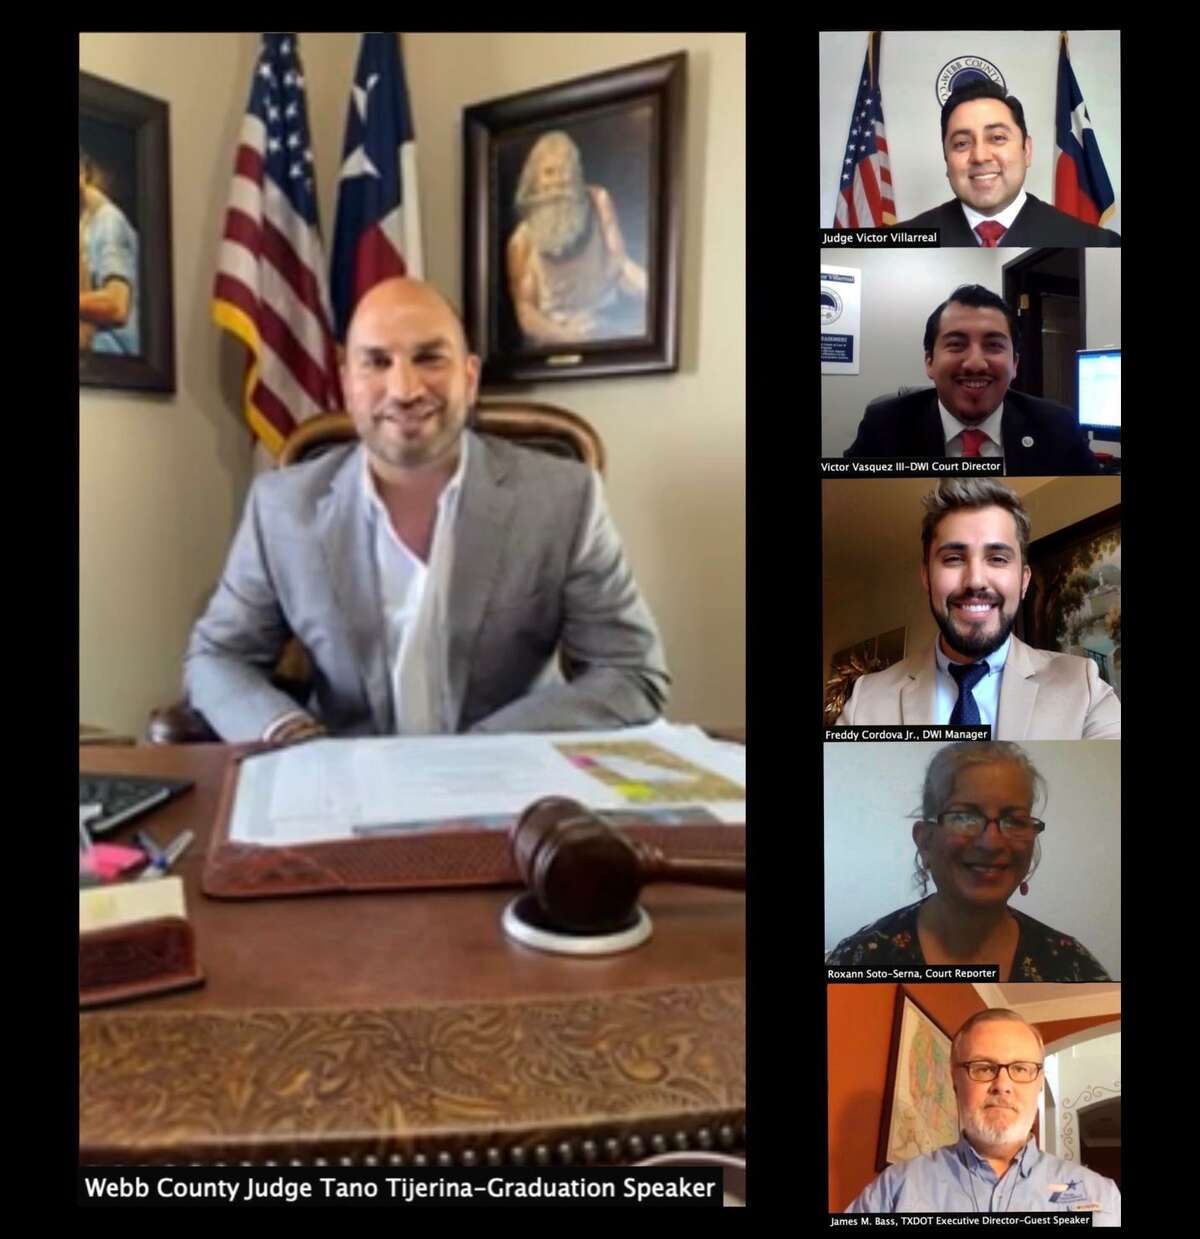 Pictured are Webb County Judge Tano Tijerina; Judge Victor Villarreal; DWI Court Program Director Victor Vasquez III, DWI Court Case Manager Freddy Cordoba Jr., Court Reporter Roxann Soto-Serna and Executive Director for the Texas Department of Transportation James M. Bass.